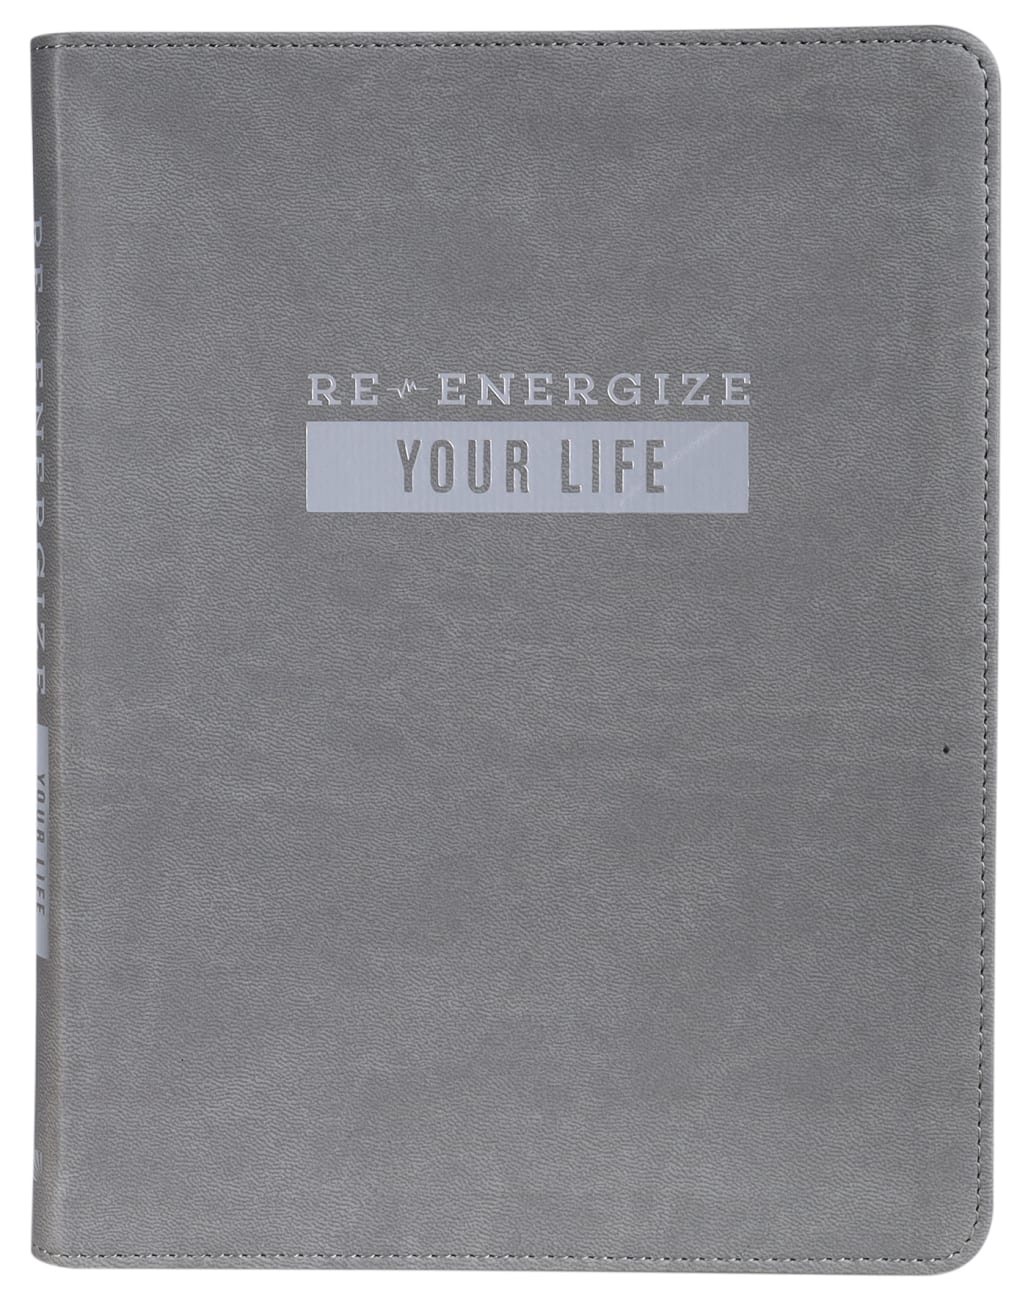 Re-Energize Your Life (Guided Journal) Hardback